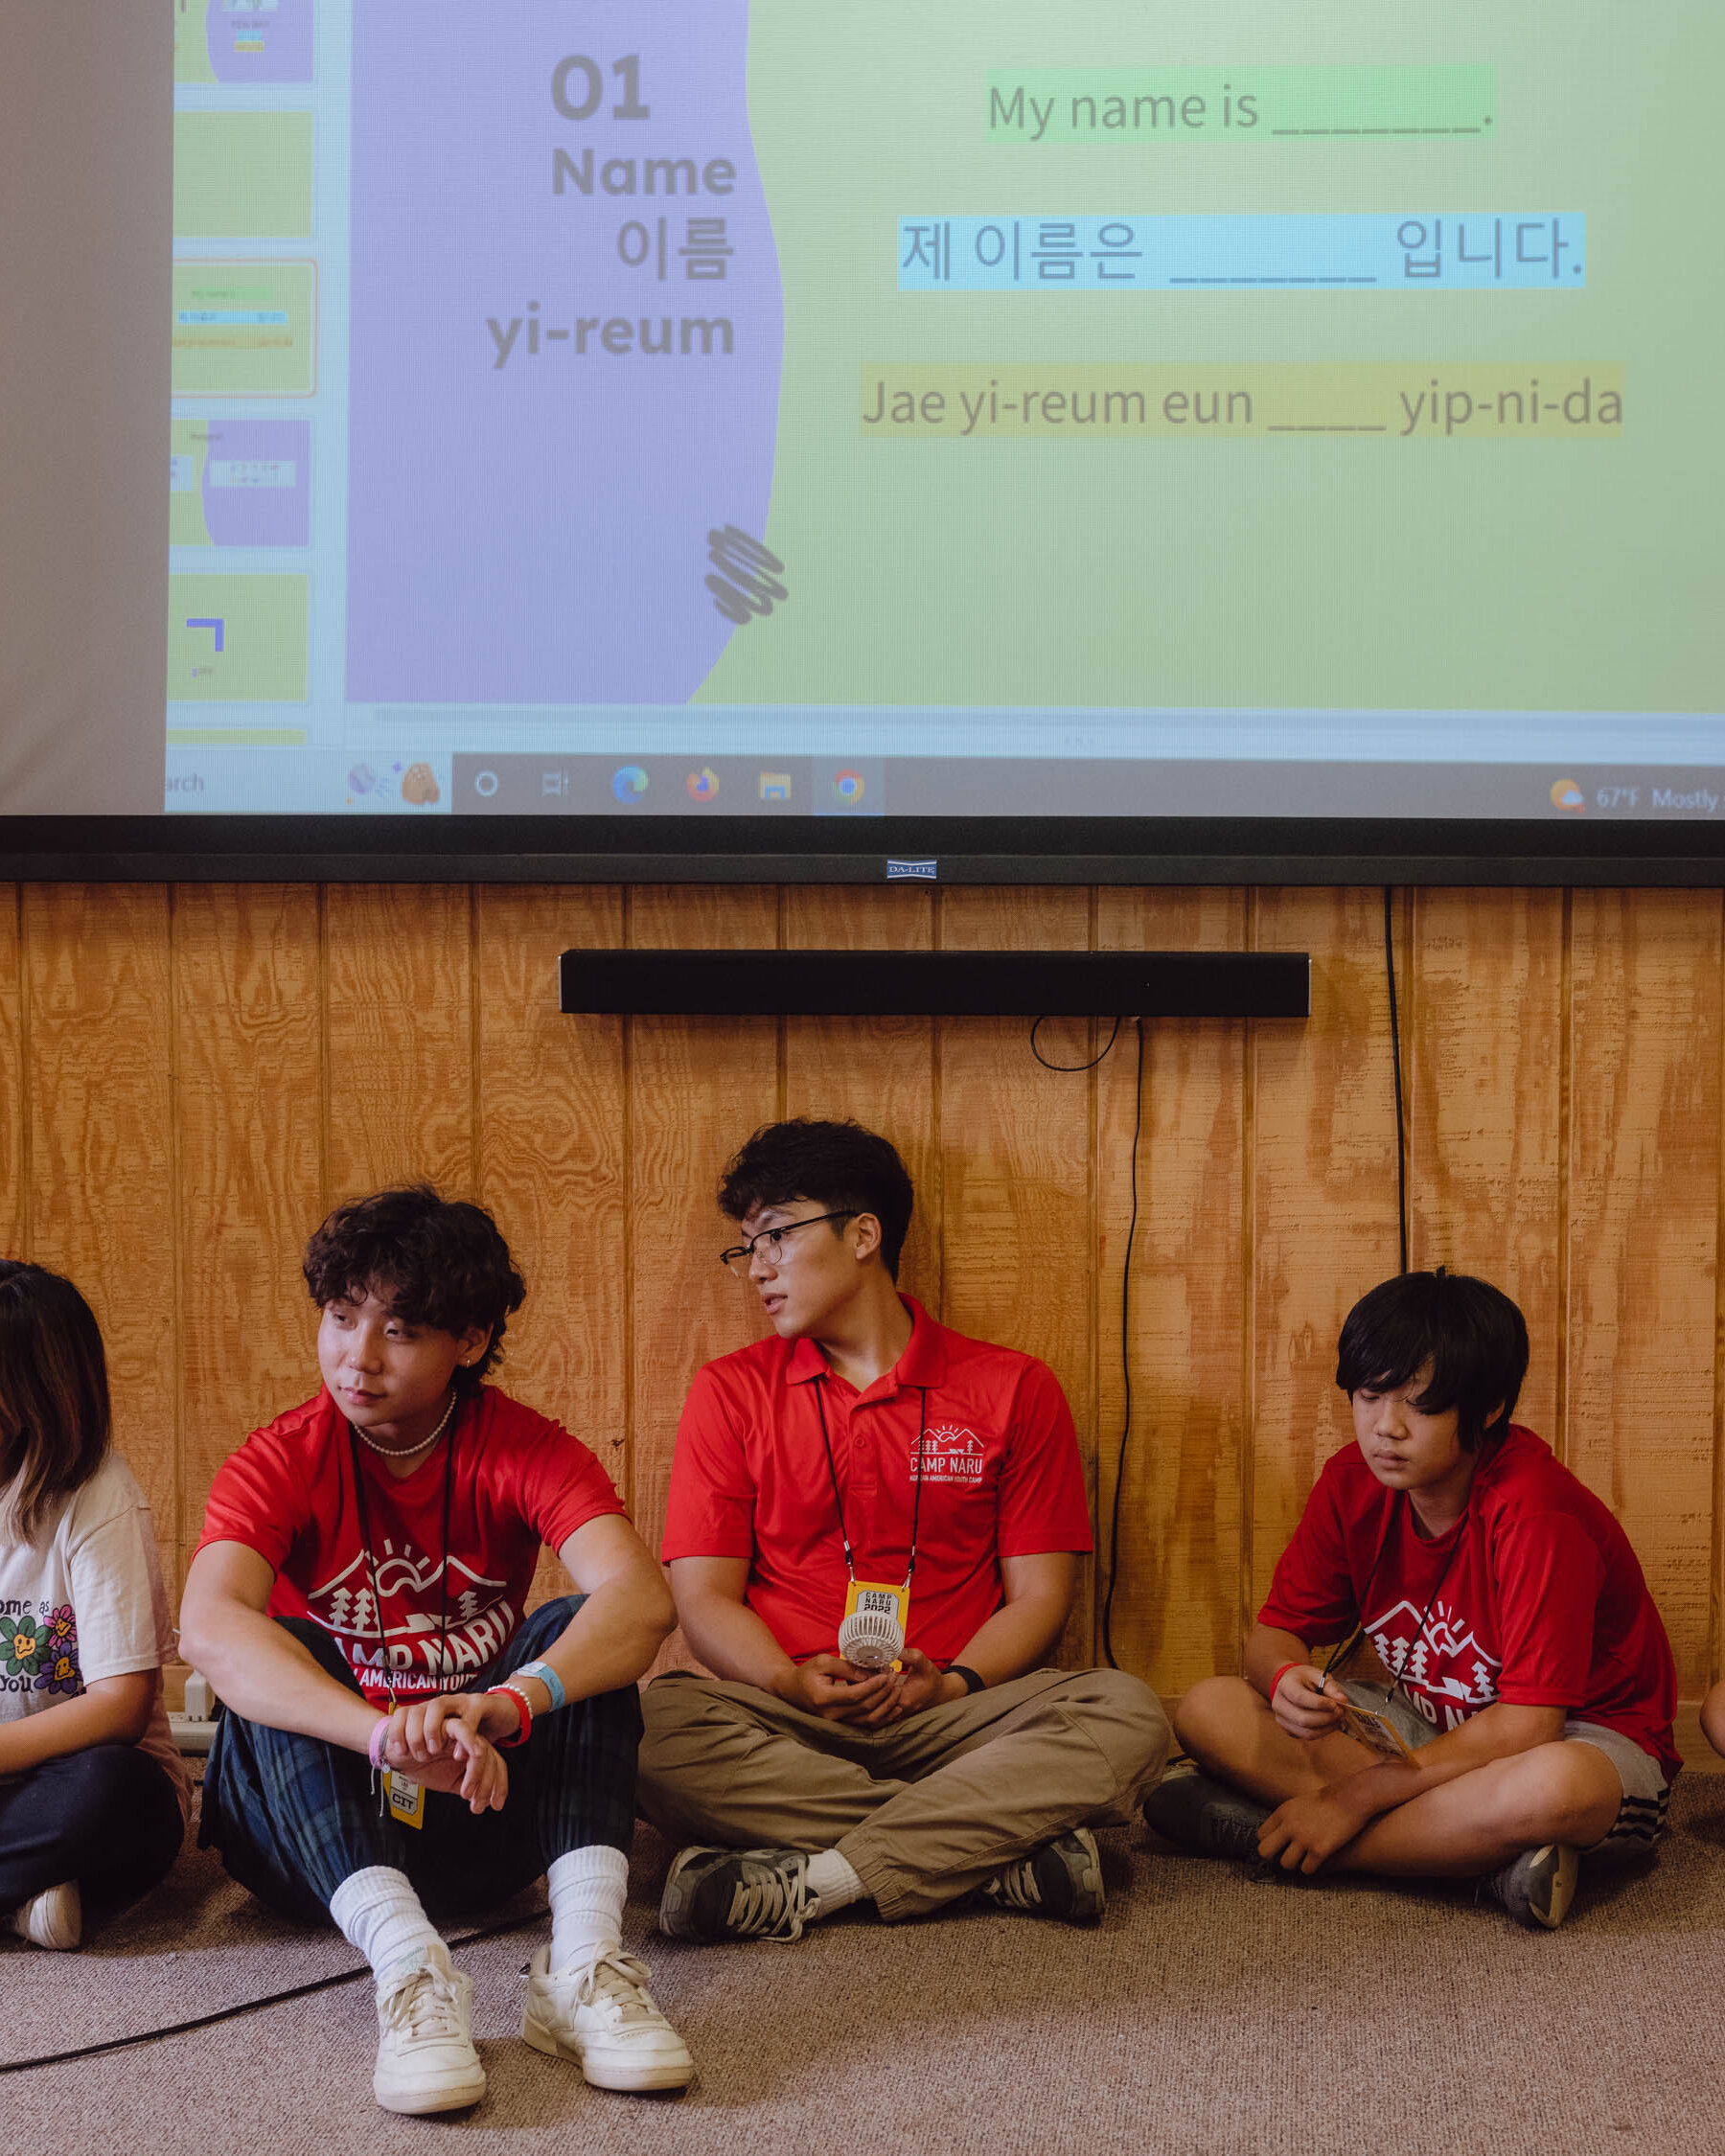 Five young people sit on a carpeted floor against a wood paneled wall, below a projector screen with an English and Korean lesson projected on it. Three of the children wear red T-shirts that say Camp Naru. The fourth, who is older, wears a red Camp Naru polo. The fifth, on the end, wears a white T-shirt with pink, green and yellow flowers on it.